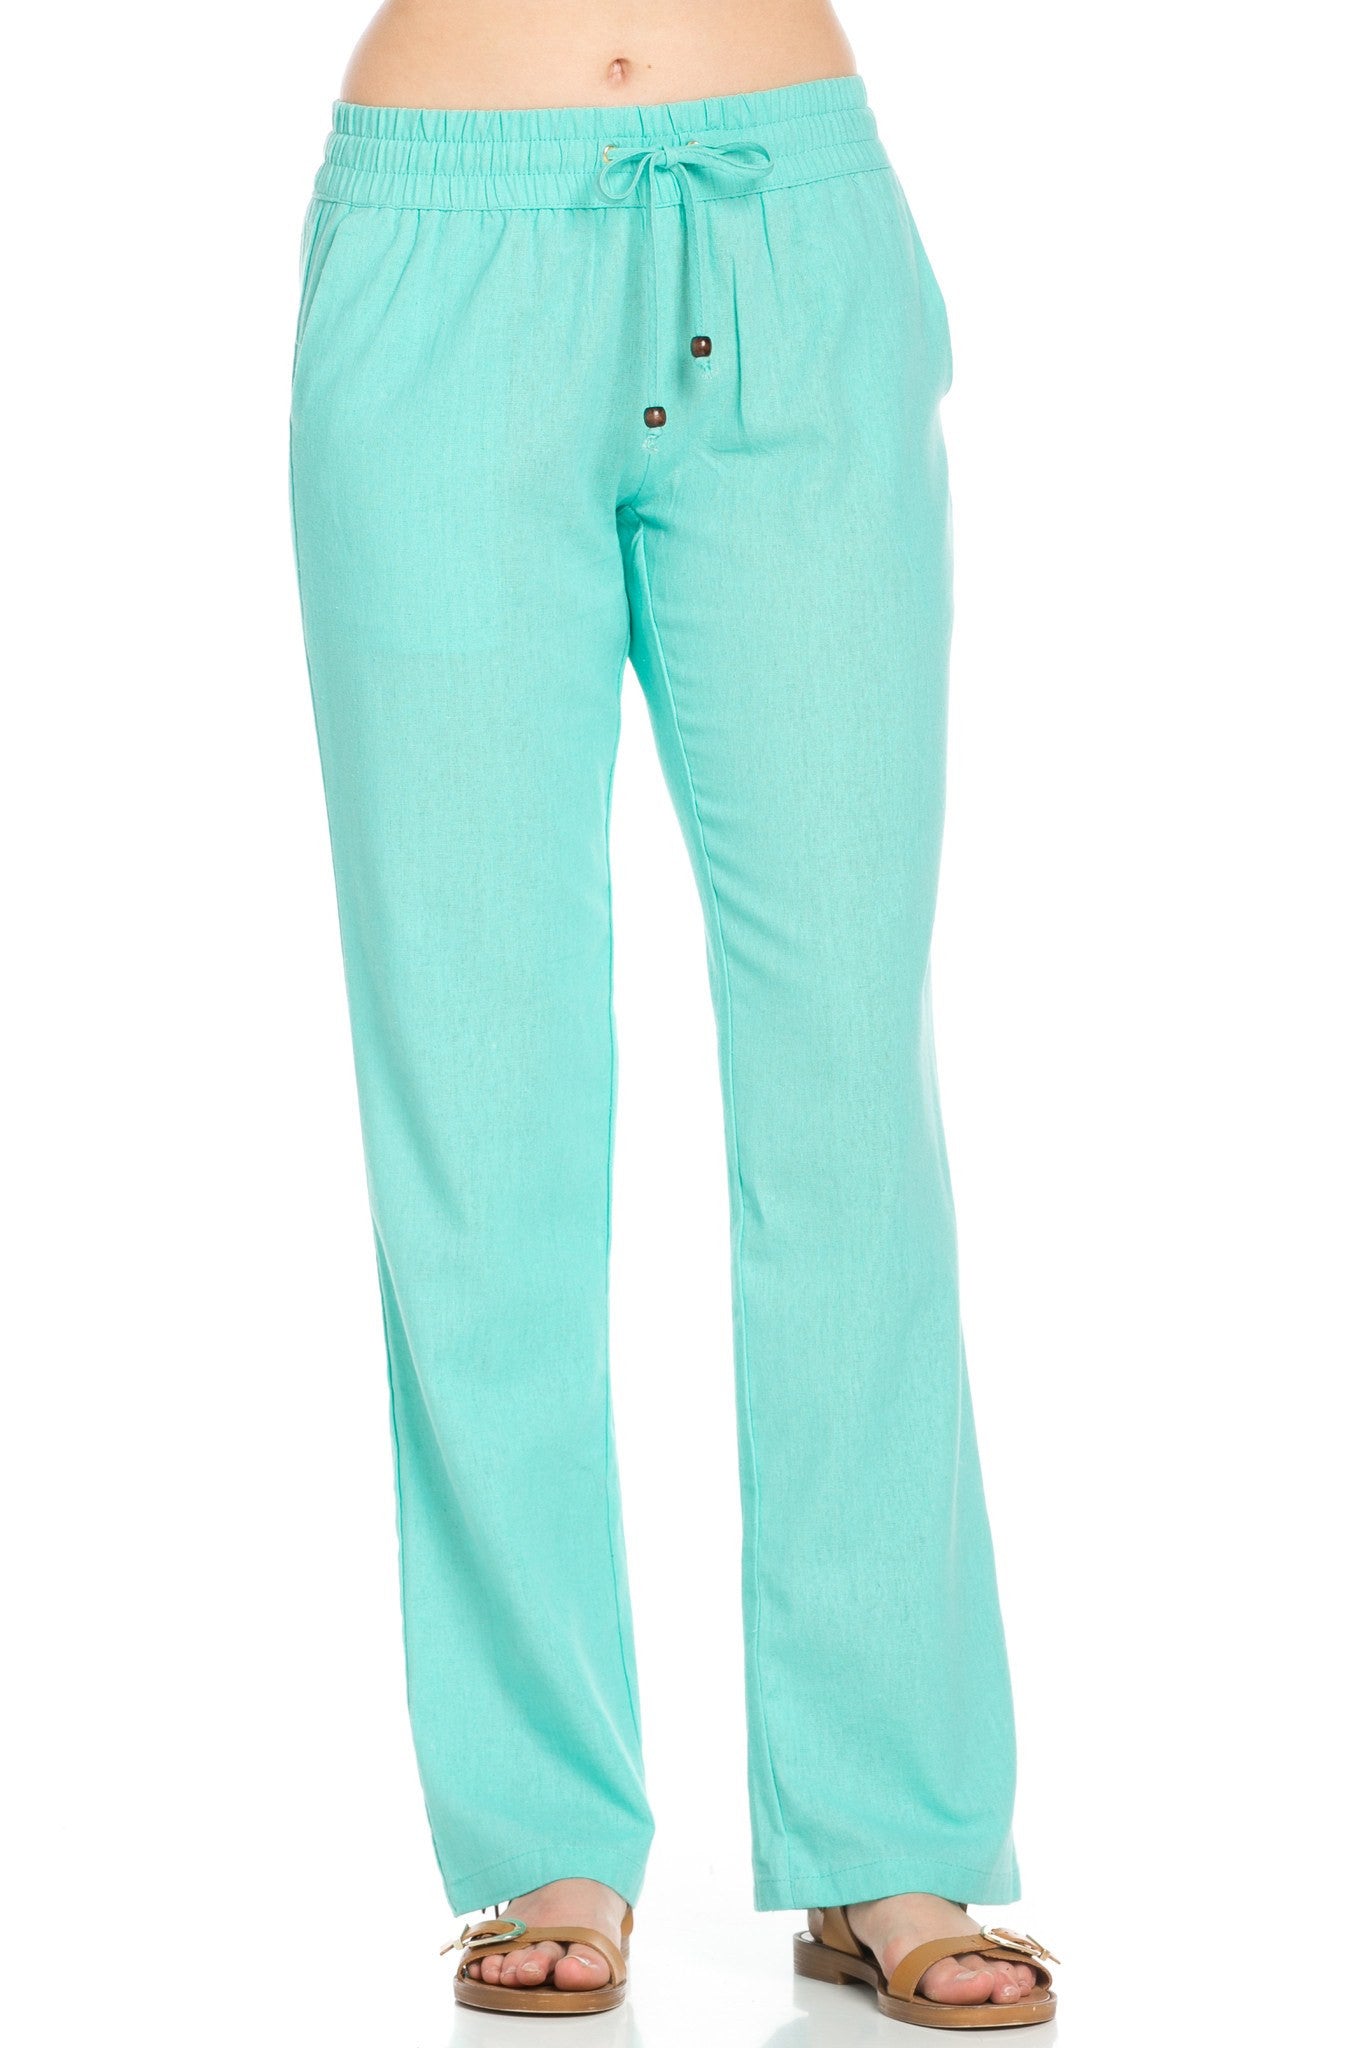 Comfy Drawstring Linen Pants Long with Band Waist (Mint) - Poplooks